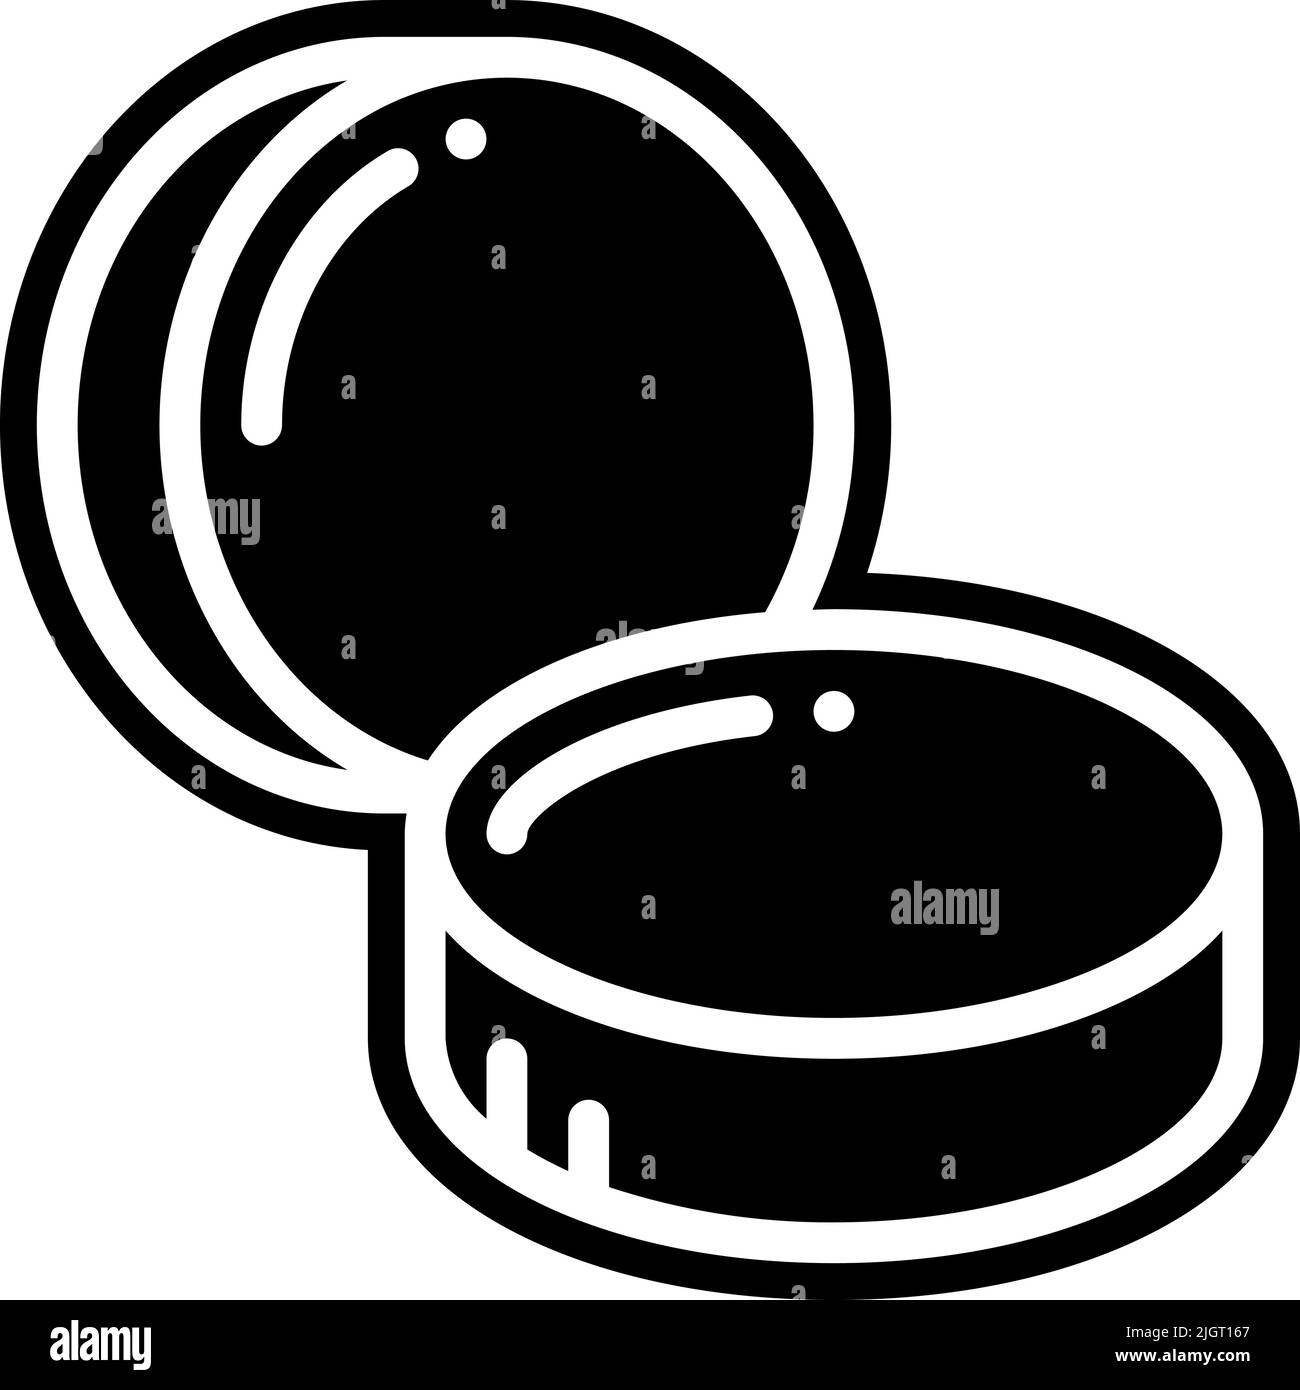 Puck Black and White Stock Photos & Images - Alamy